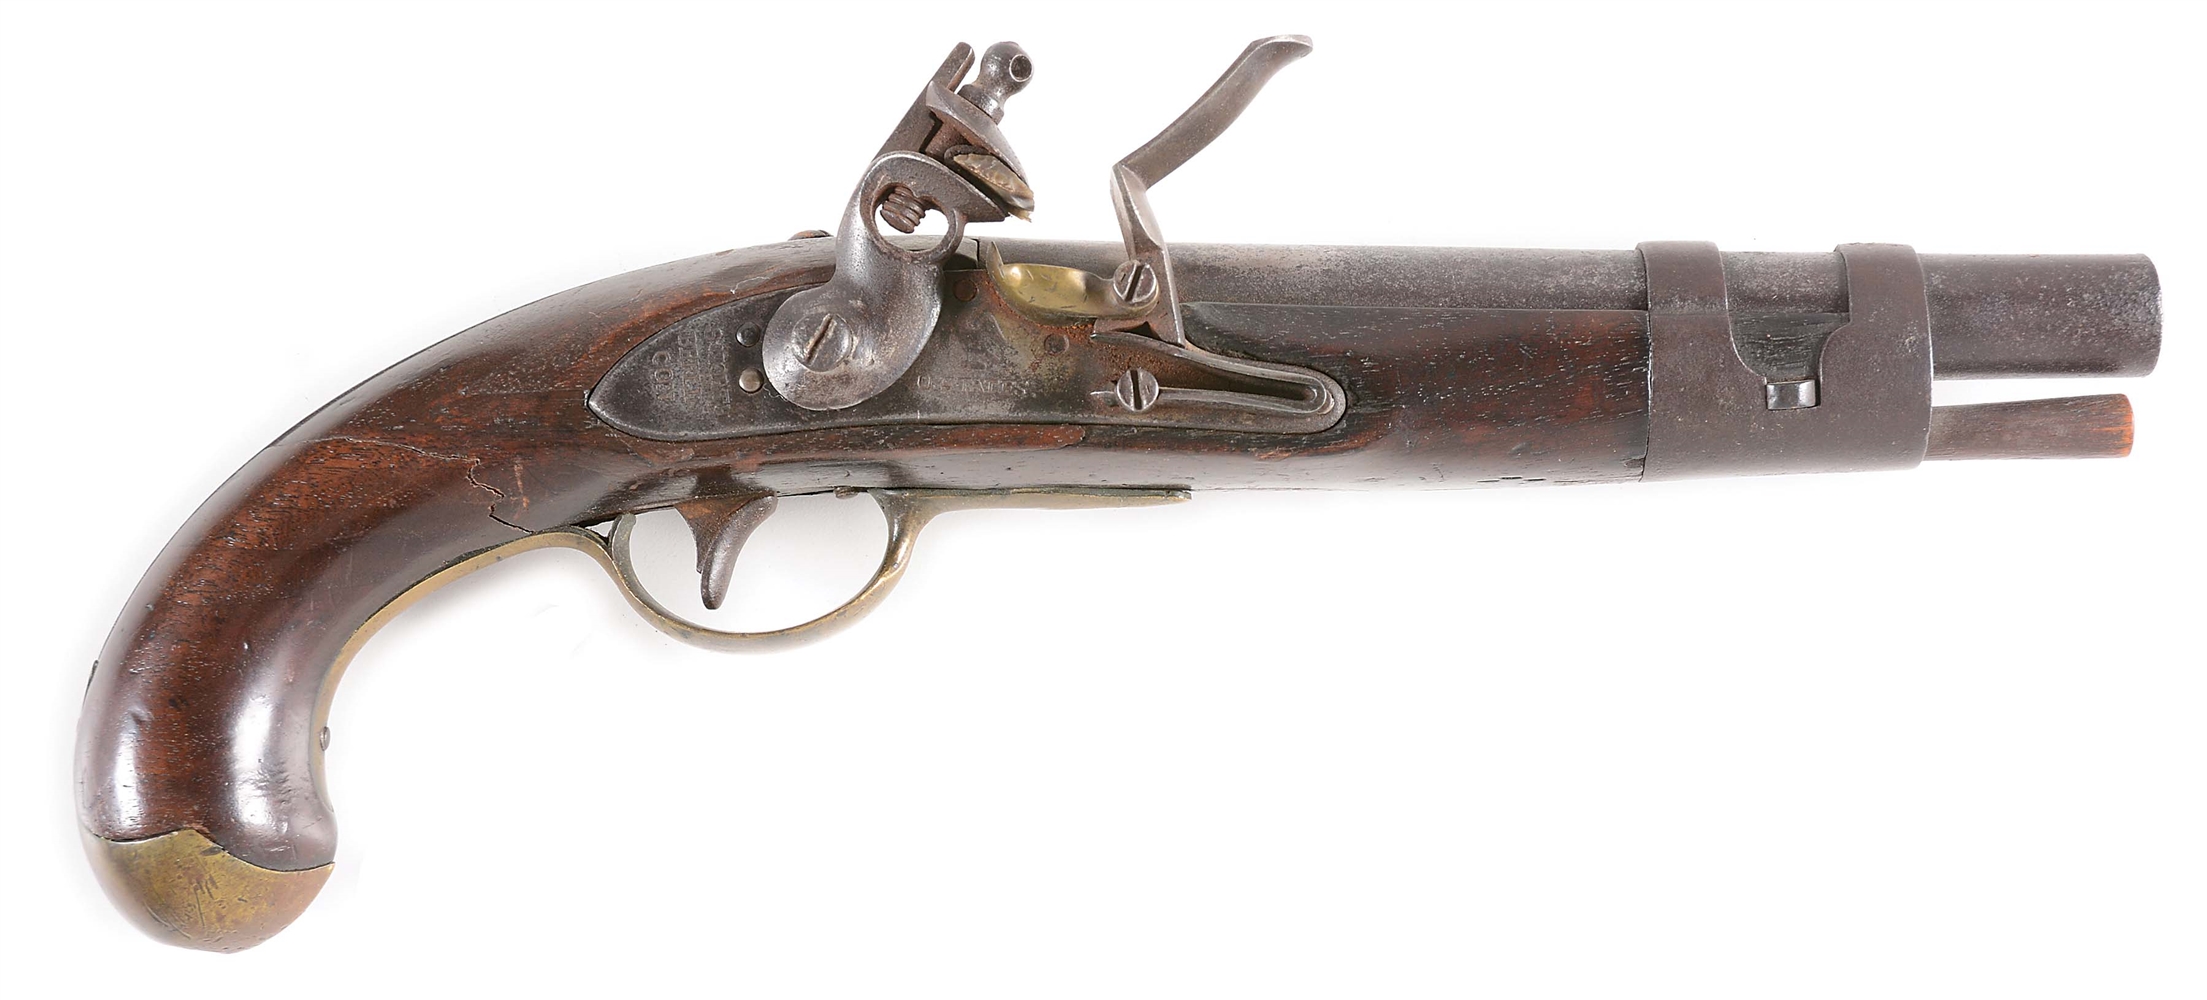 (A) A SCARCE US NORTH BERLIN MODEL 1811 TRANSITIONAL MODEL WITH 1812 MODIFICATION AND IRON DOUBLE STRAP BARREL BAND.